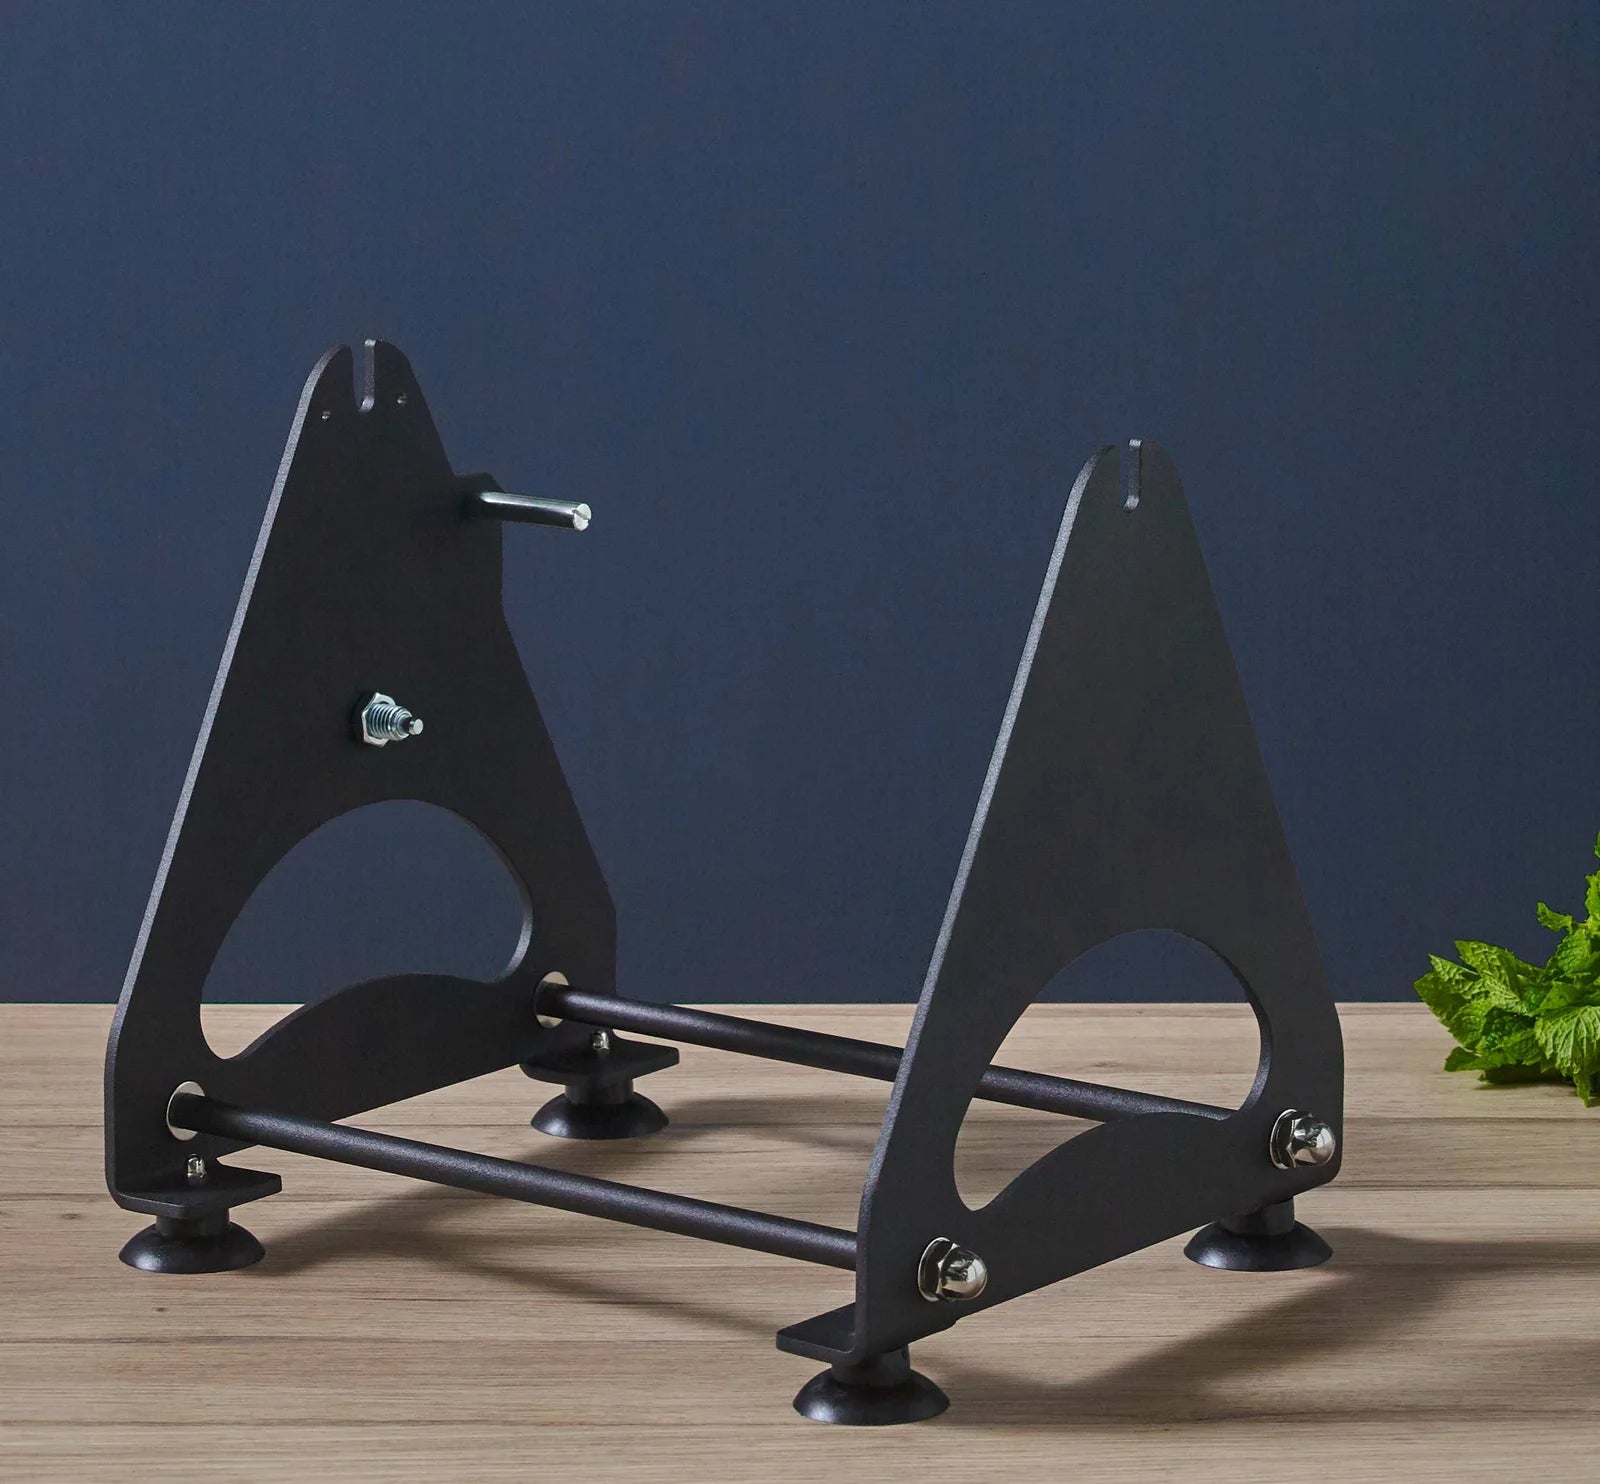 Drip Tech Mount Stand | For HoneyComb Rosin Press 7 Tonne